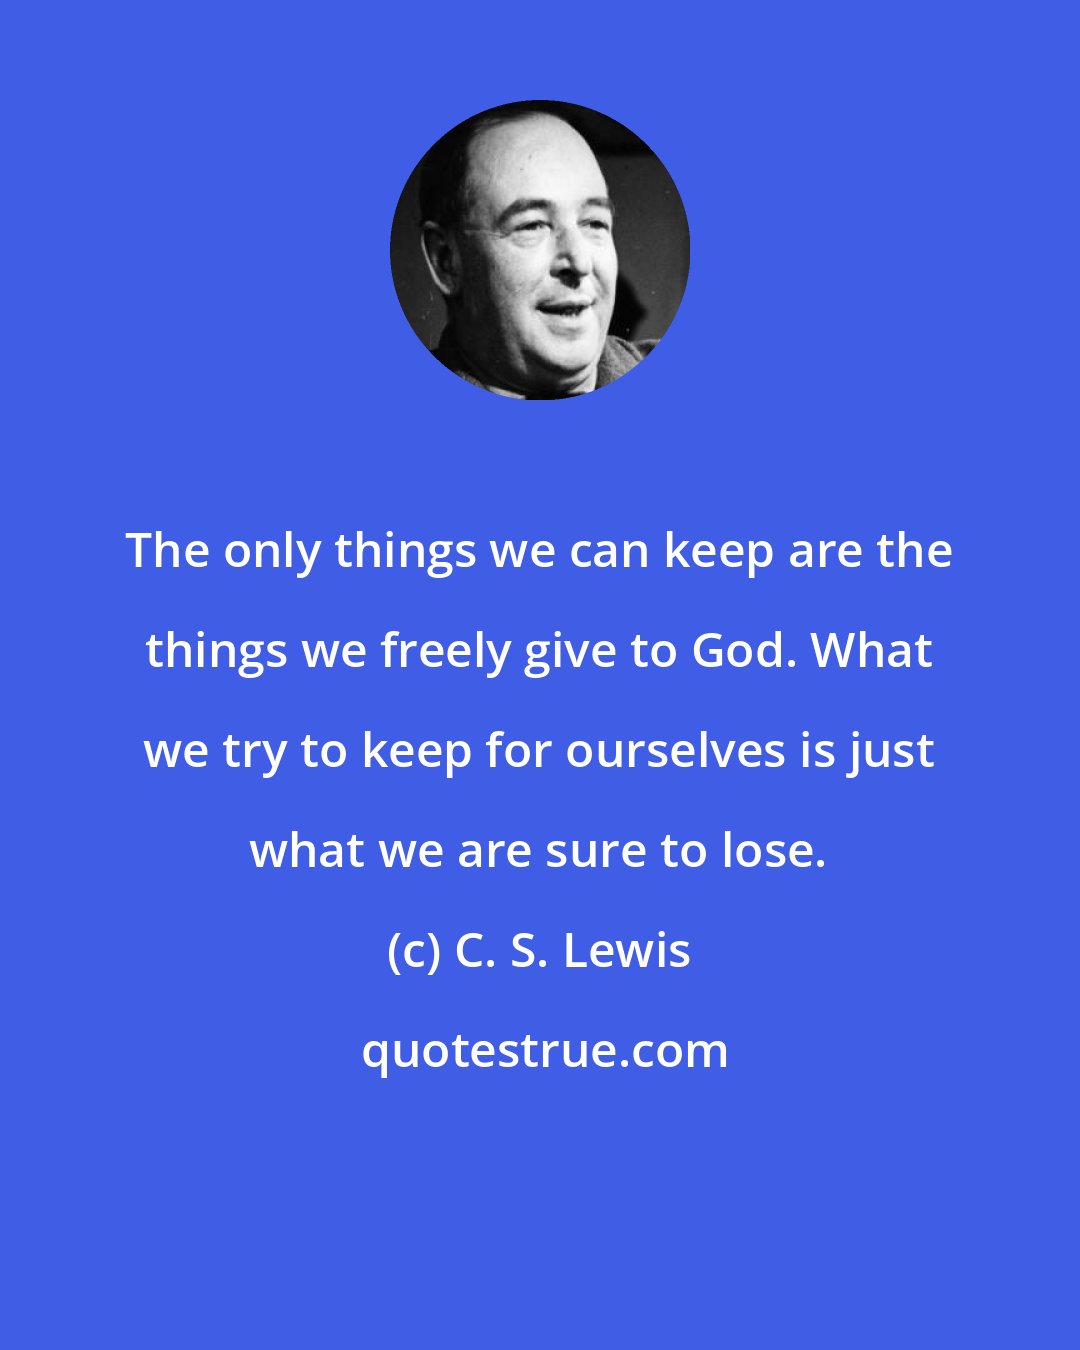 C. S. Lewis: The only things we can keep are the things we freely give to God. What we try to keep for ourselves is just what we are sure to lose.